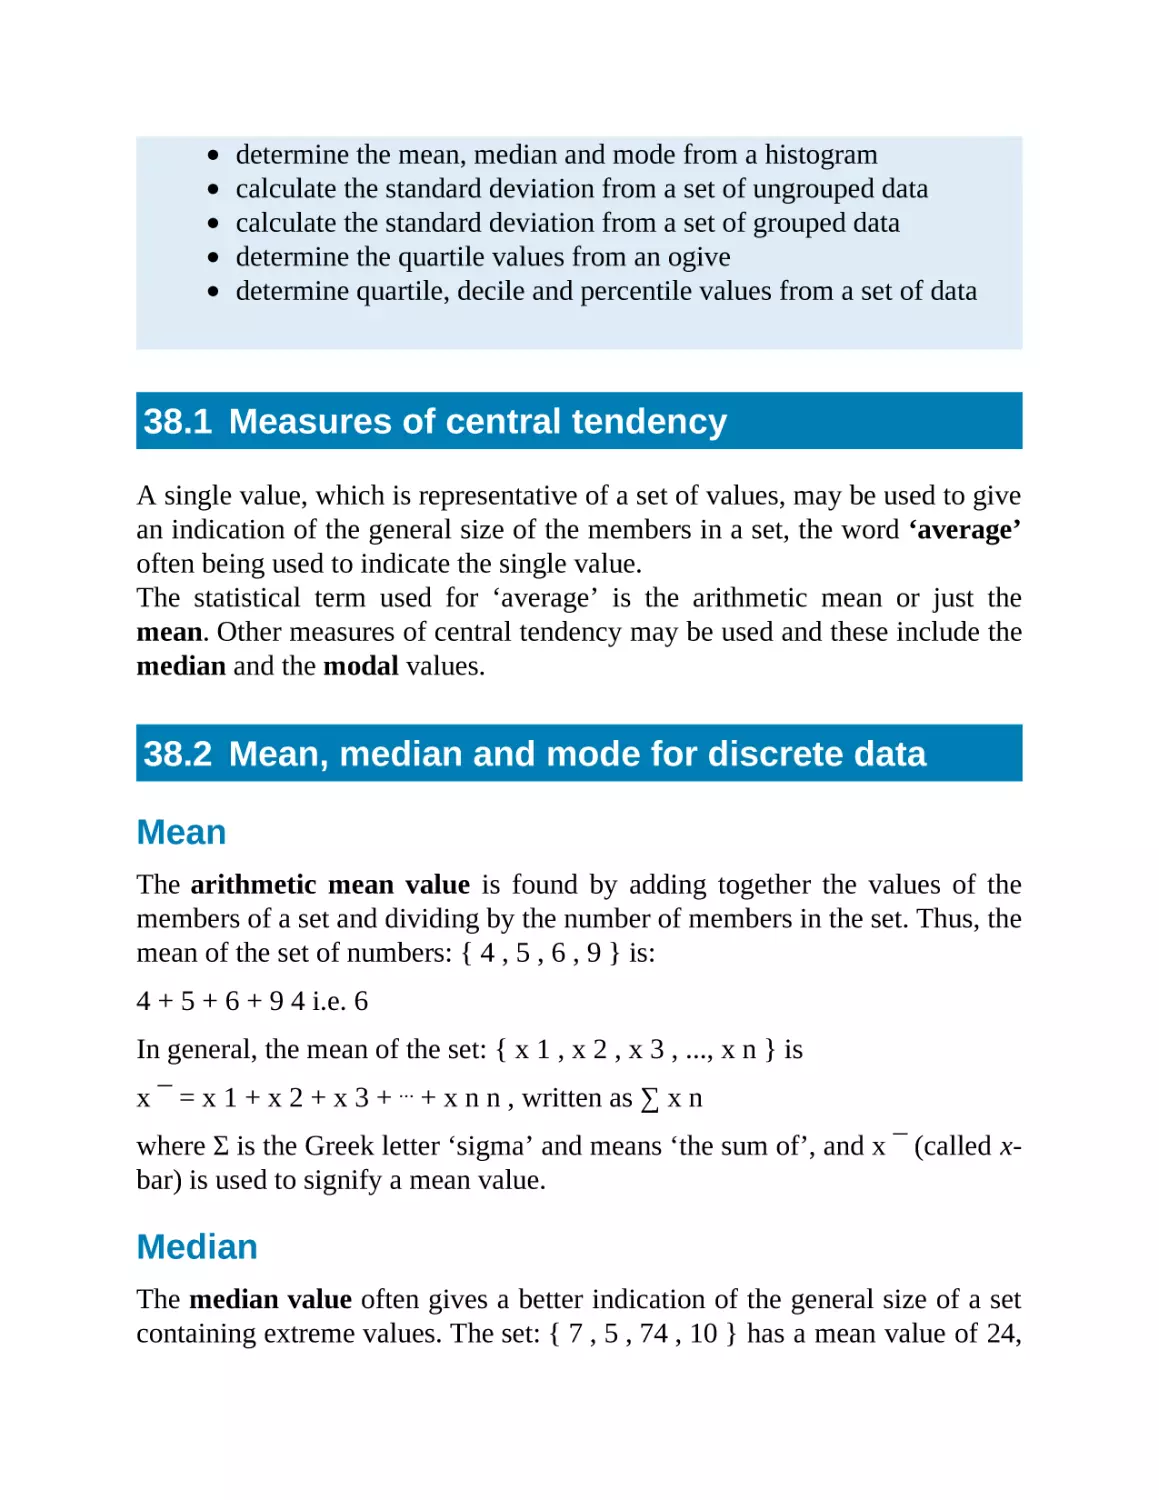 38.1 Measures of central tendency
38.2 Mean, median and mode for discrete data